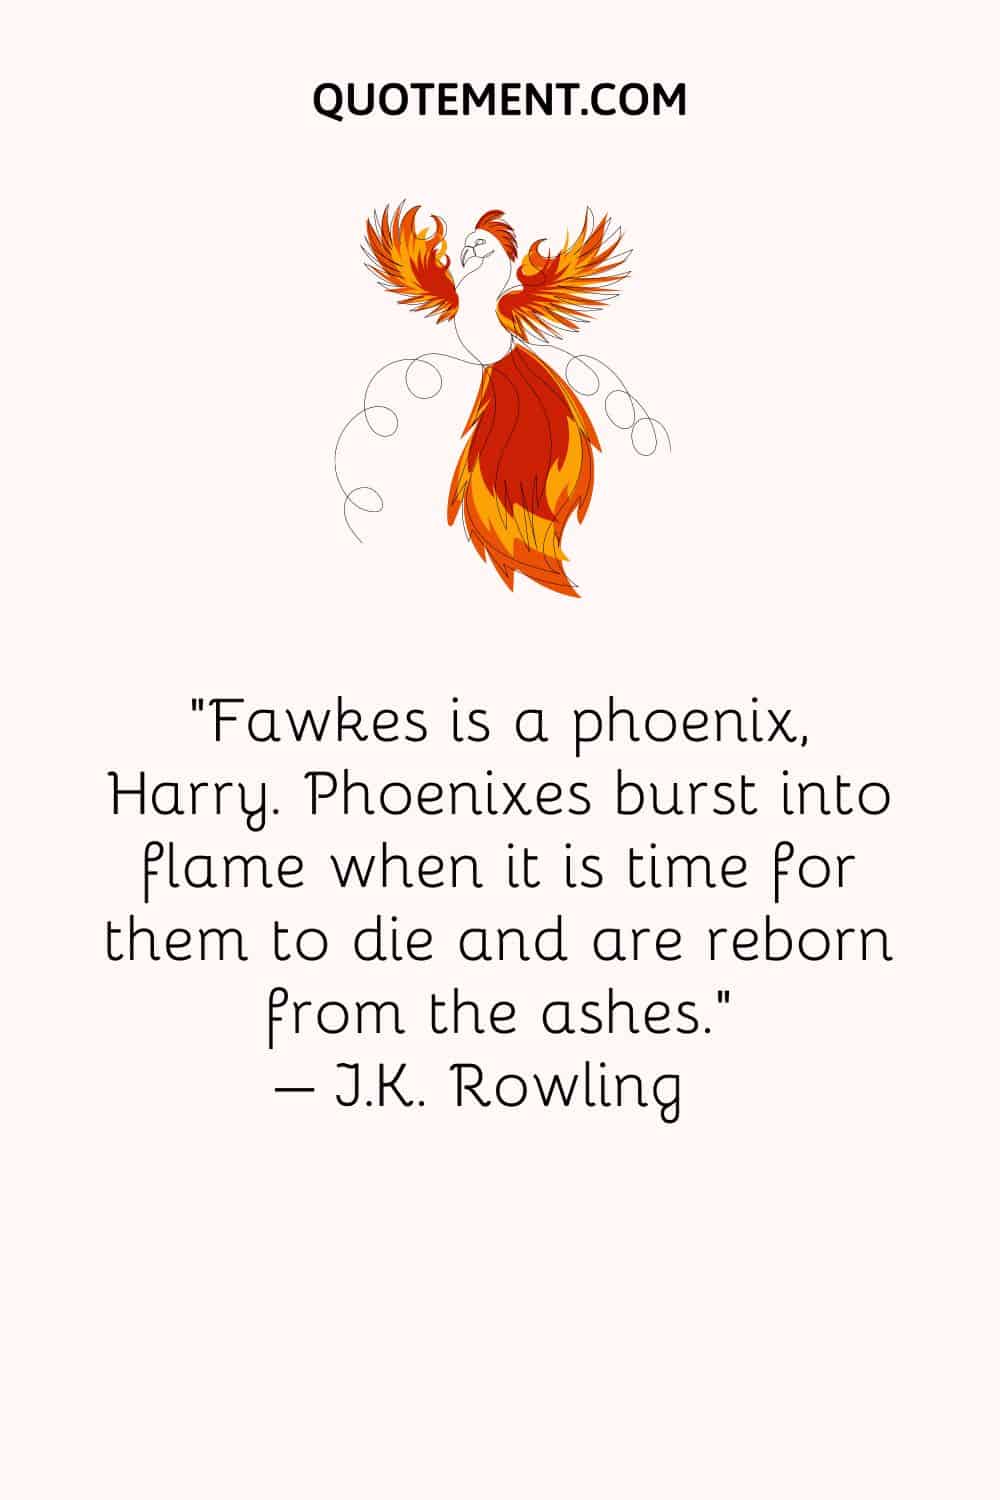 Phoenixes burst into flame when it is time for them to die and are reborn from the ashes